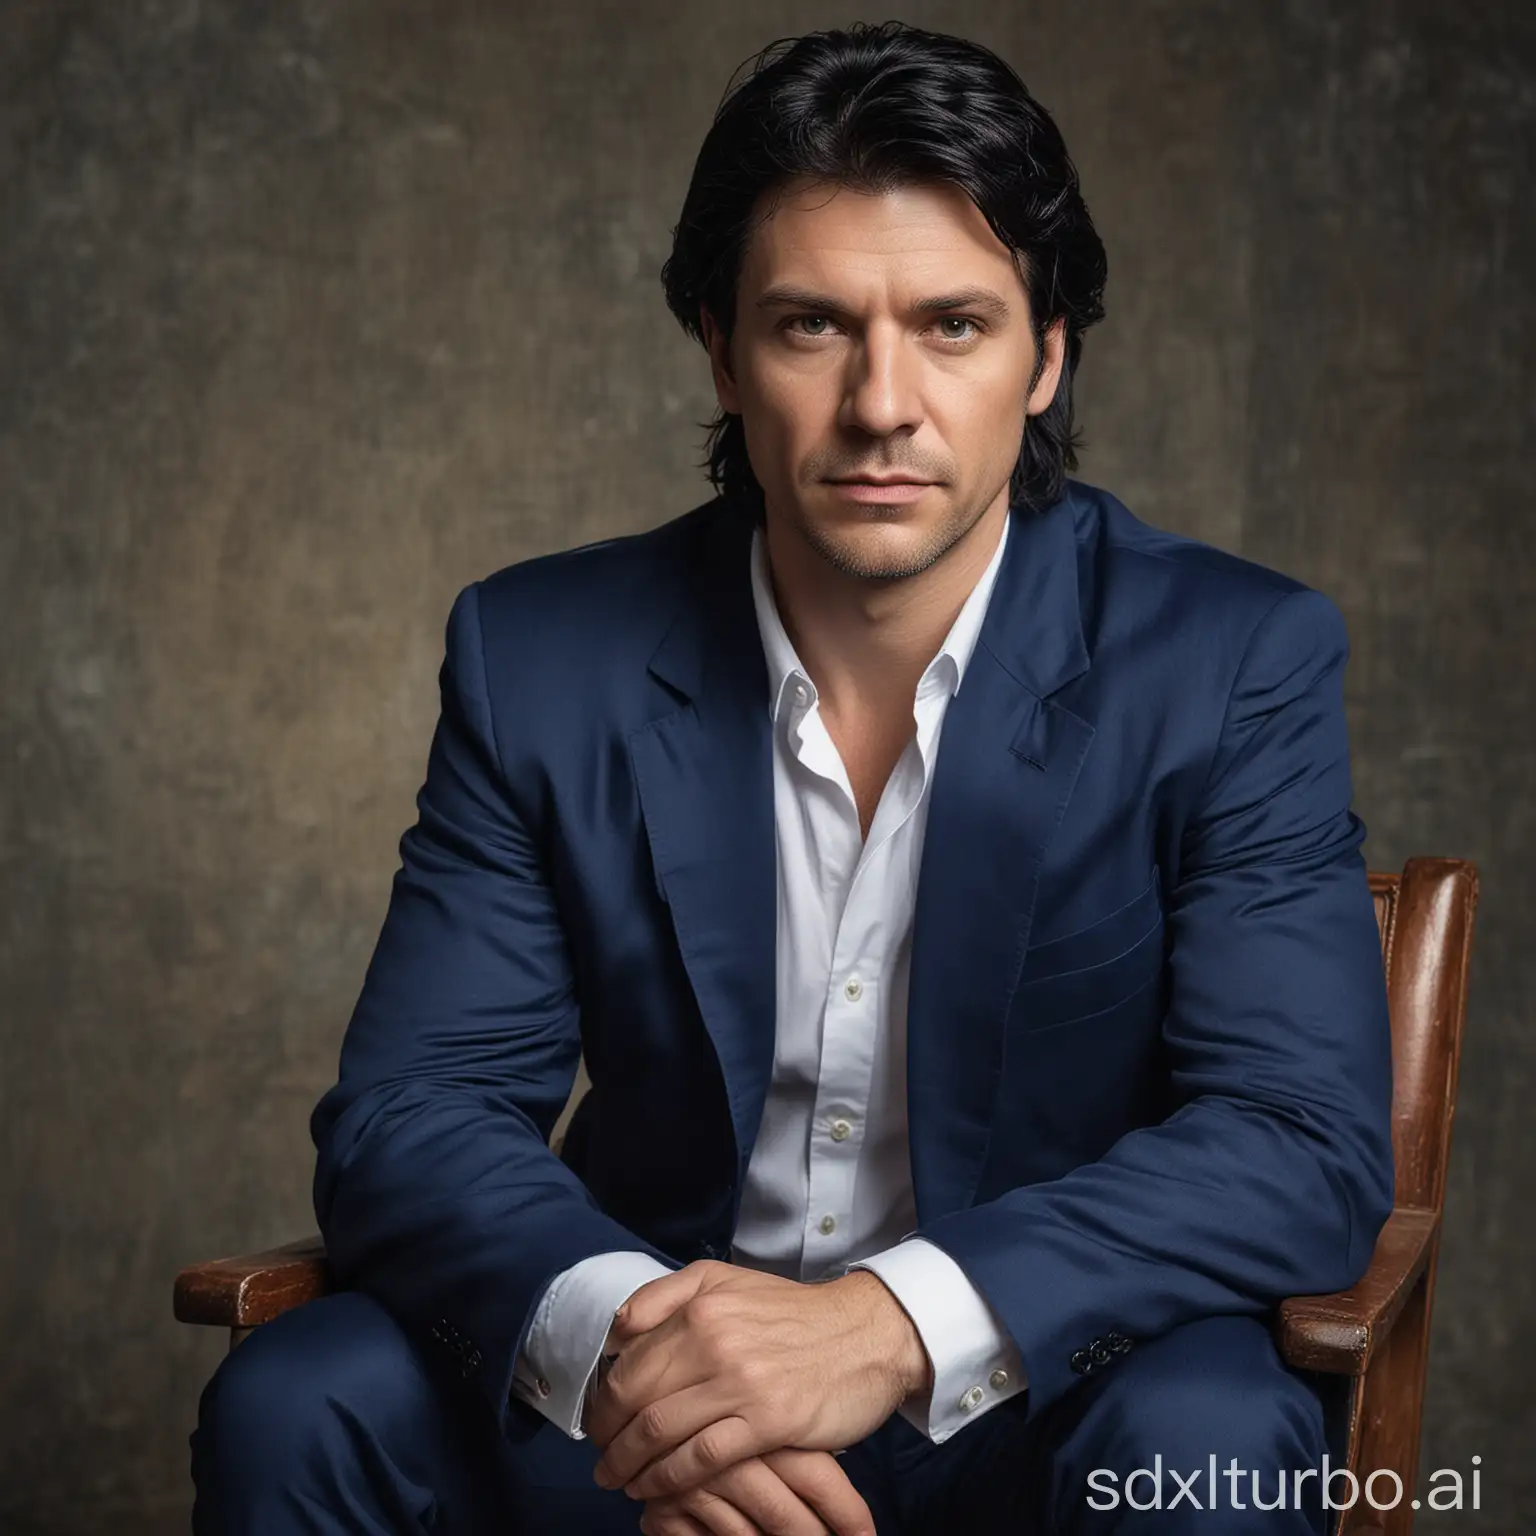 Imagine a 45 years old white Caucasian European male, with black hair, attractive look, dramatic look, and charismatic look; seem to have wisdom and vision, setting on a chair, looking straight, wearing a blue blazer and white shirt.